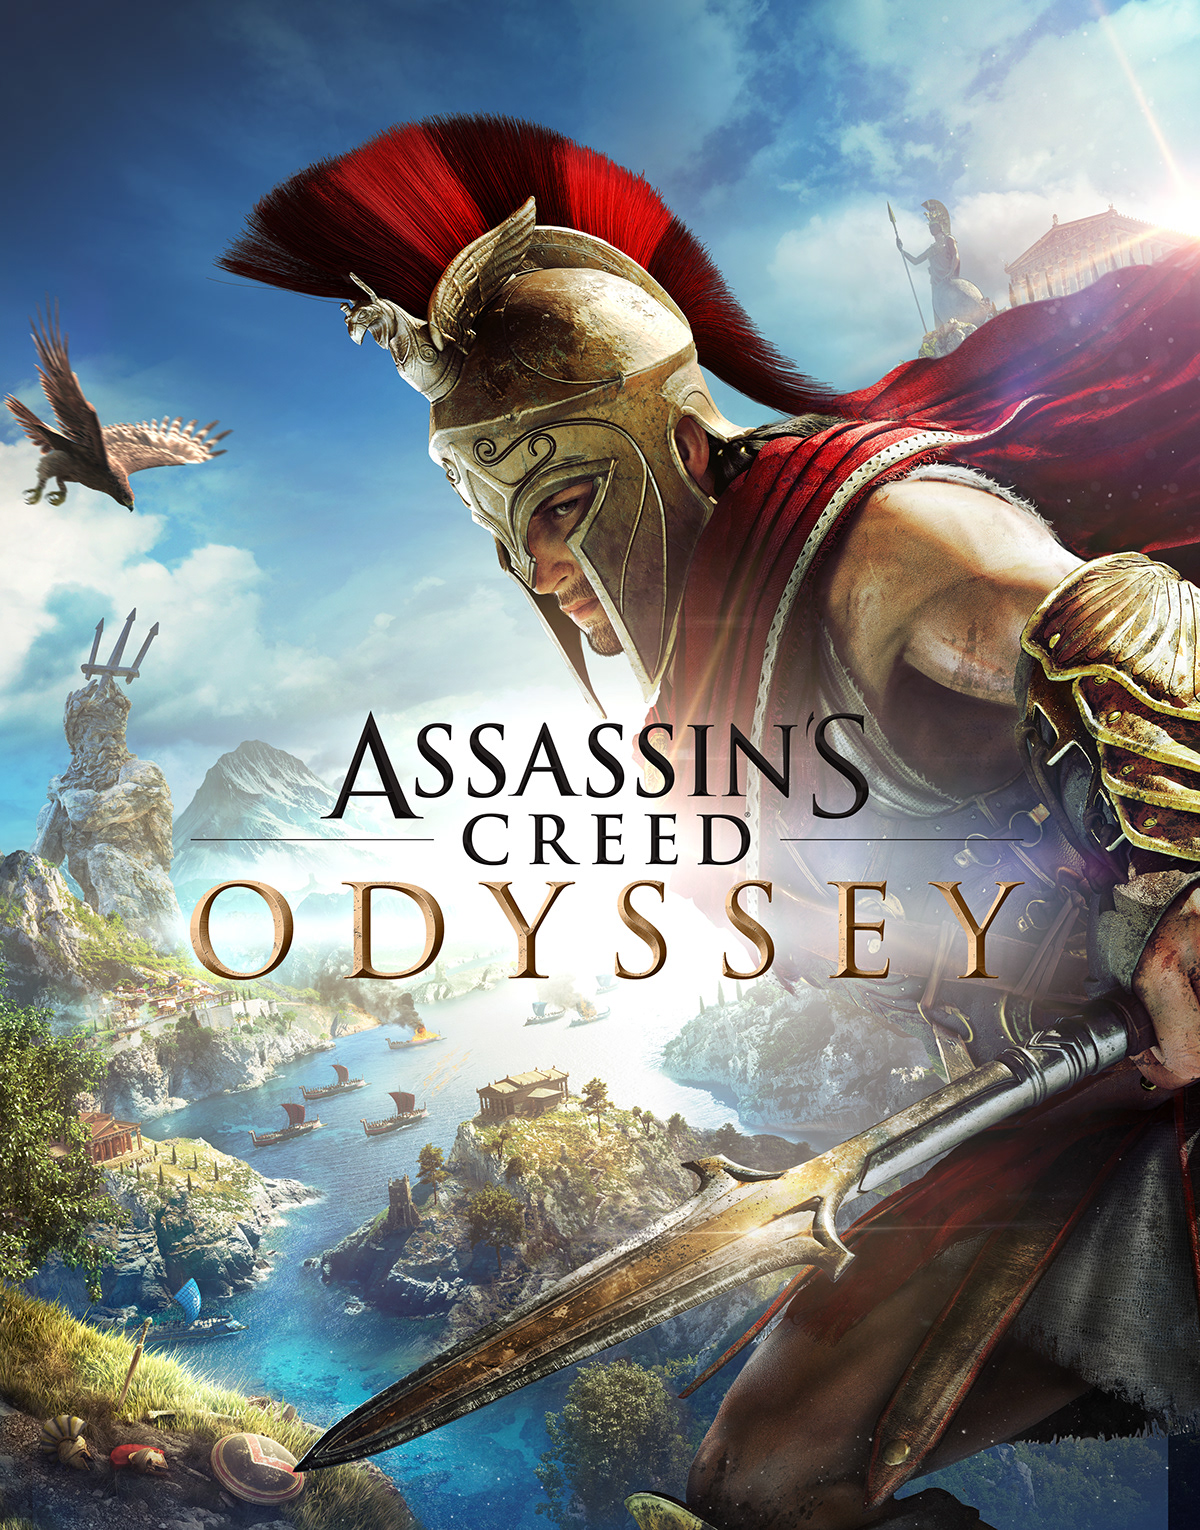 Assassin's Creed odyssey video game assassin sparta Spartan Greece ALEXIOS Kassandra Two Dots